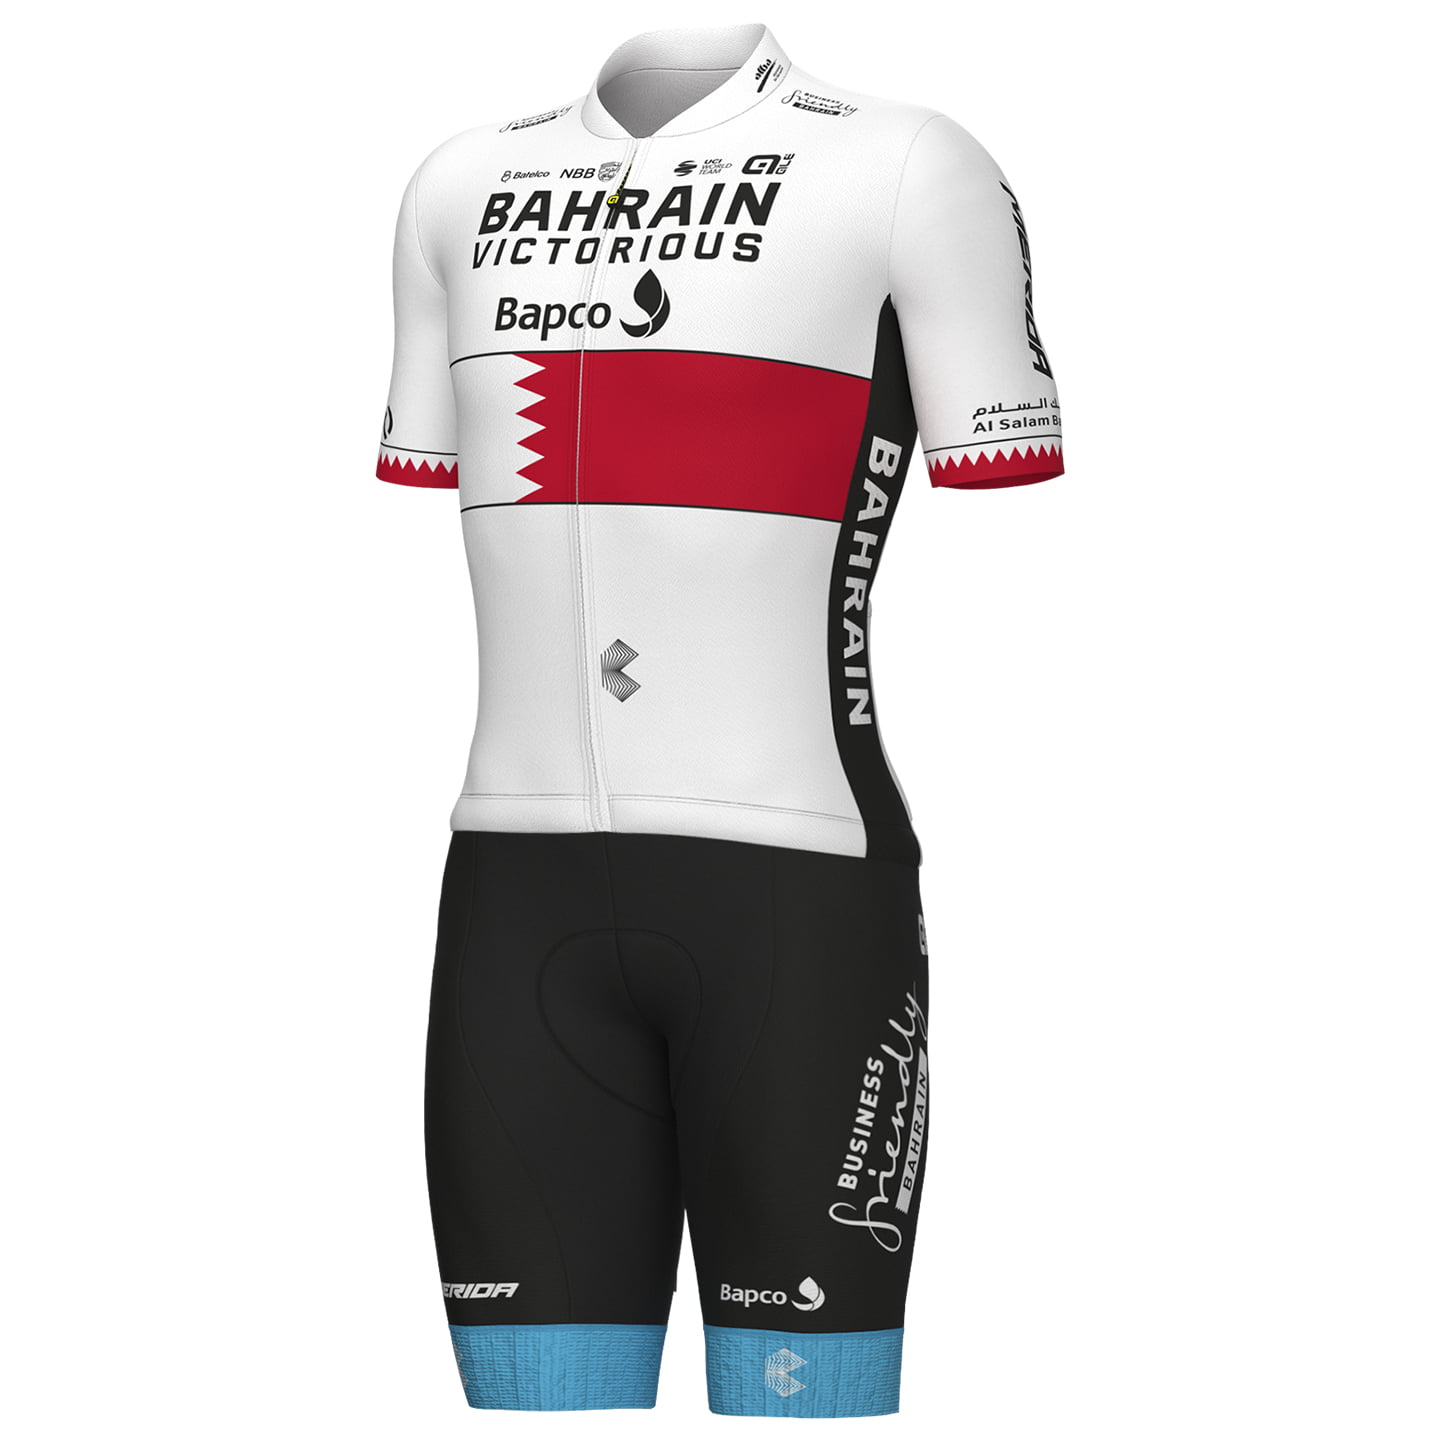 BAHRAIN- VICTORIOUS Bahrain. Meister 23 Set (cycling jersey + cycling shorts) Set (2 pieces), for men, Cycling clothing